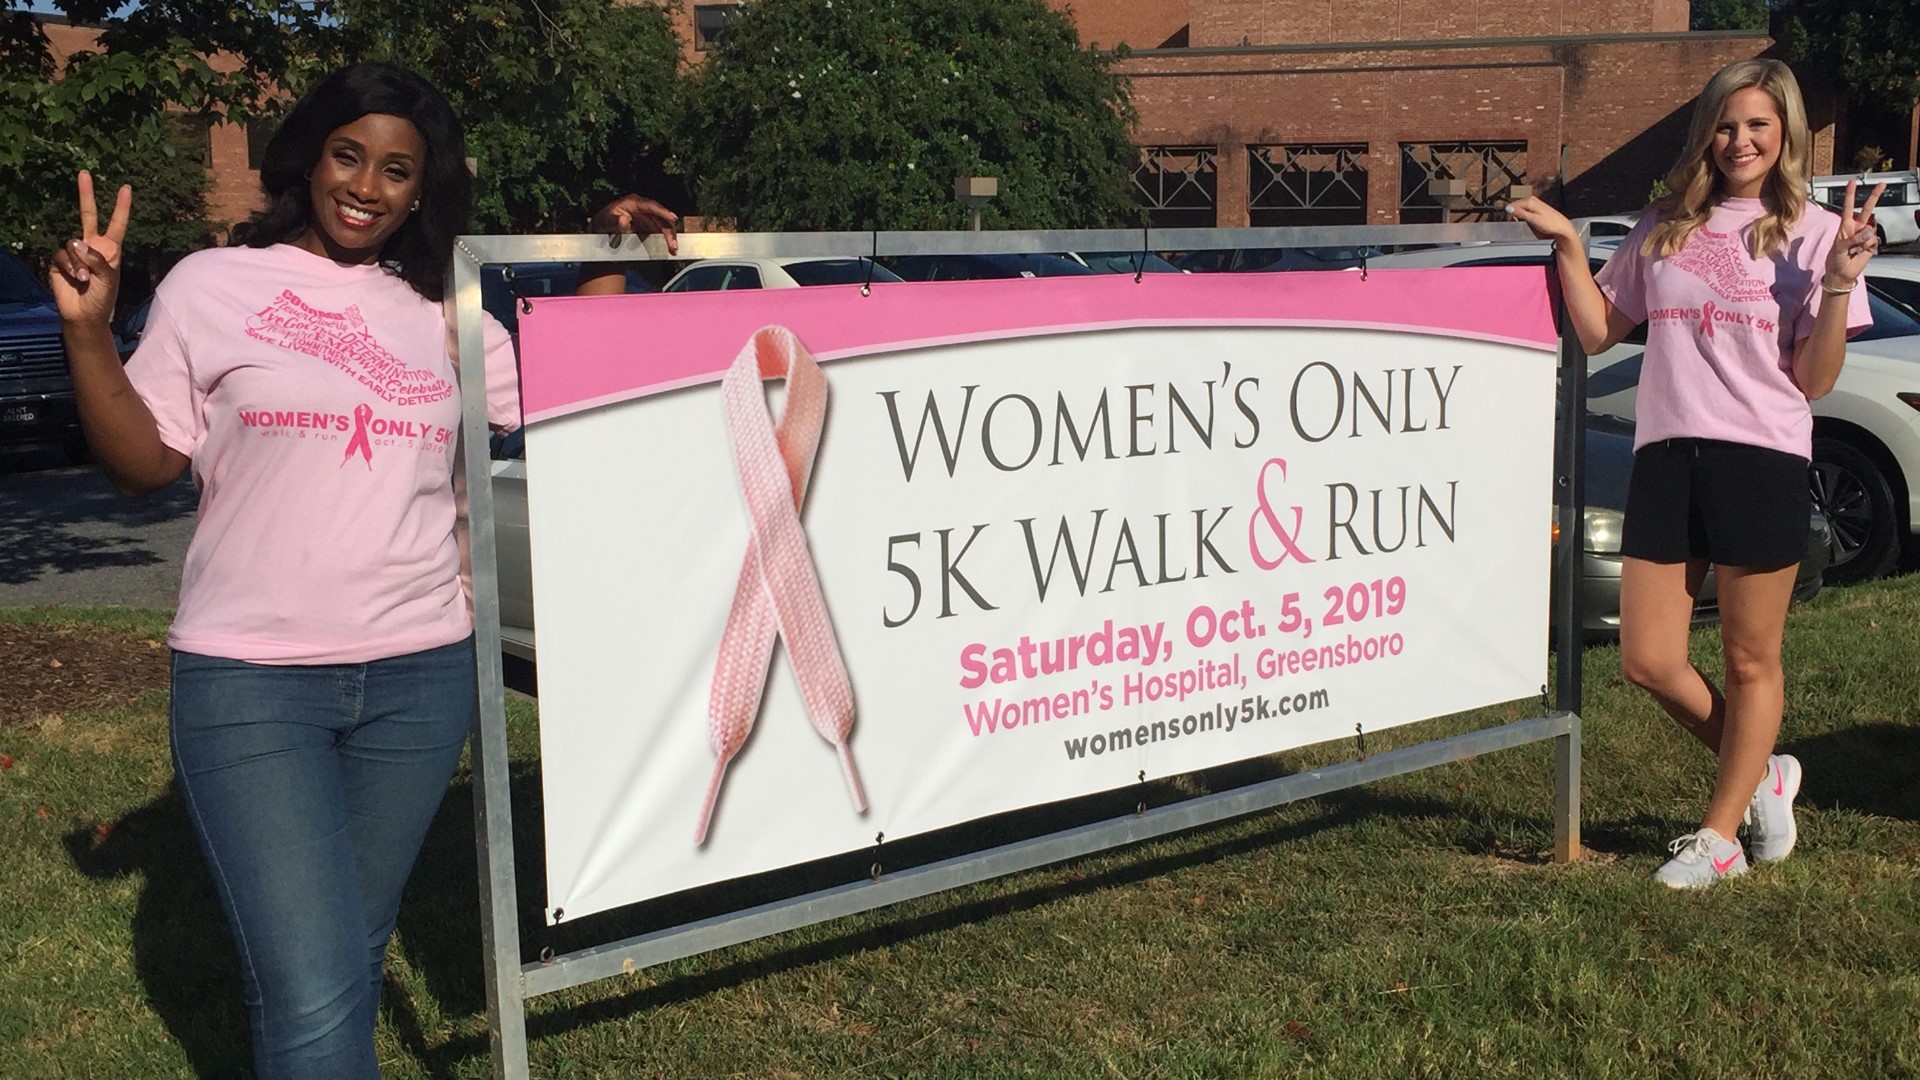 Wear your pink and walk with us on October 5 to help raise money for women who can't afford mammograms in the fight against breast cancer.